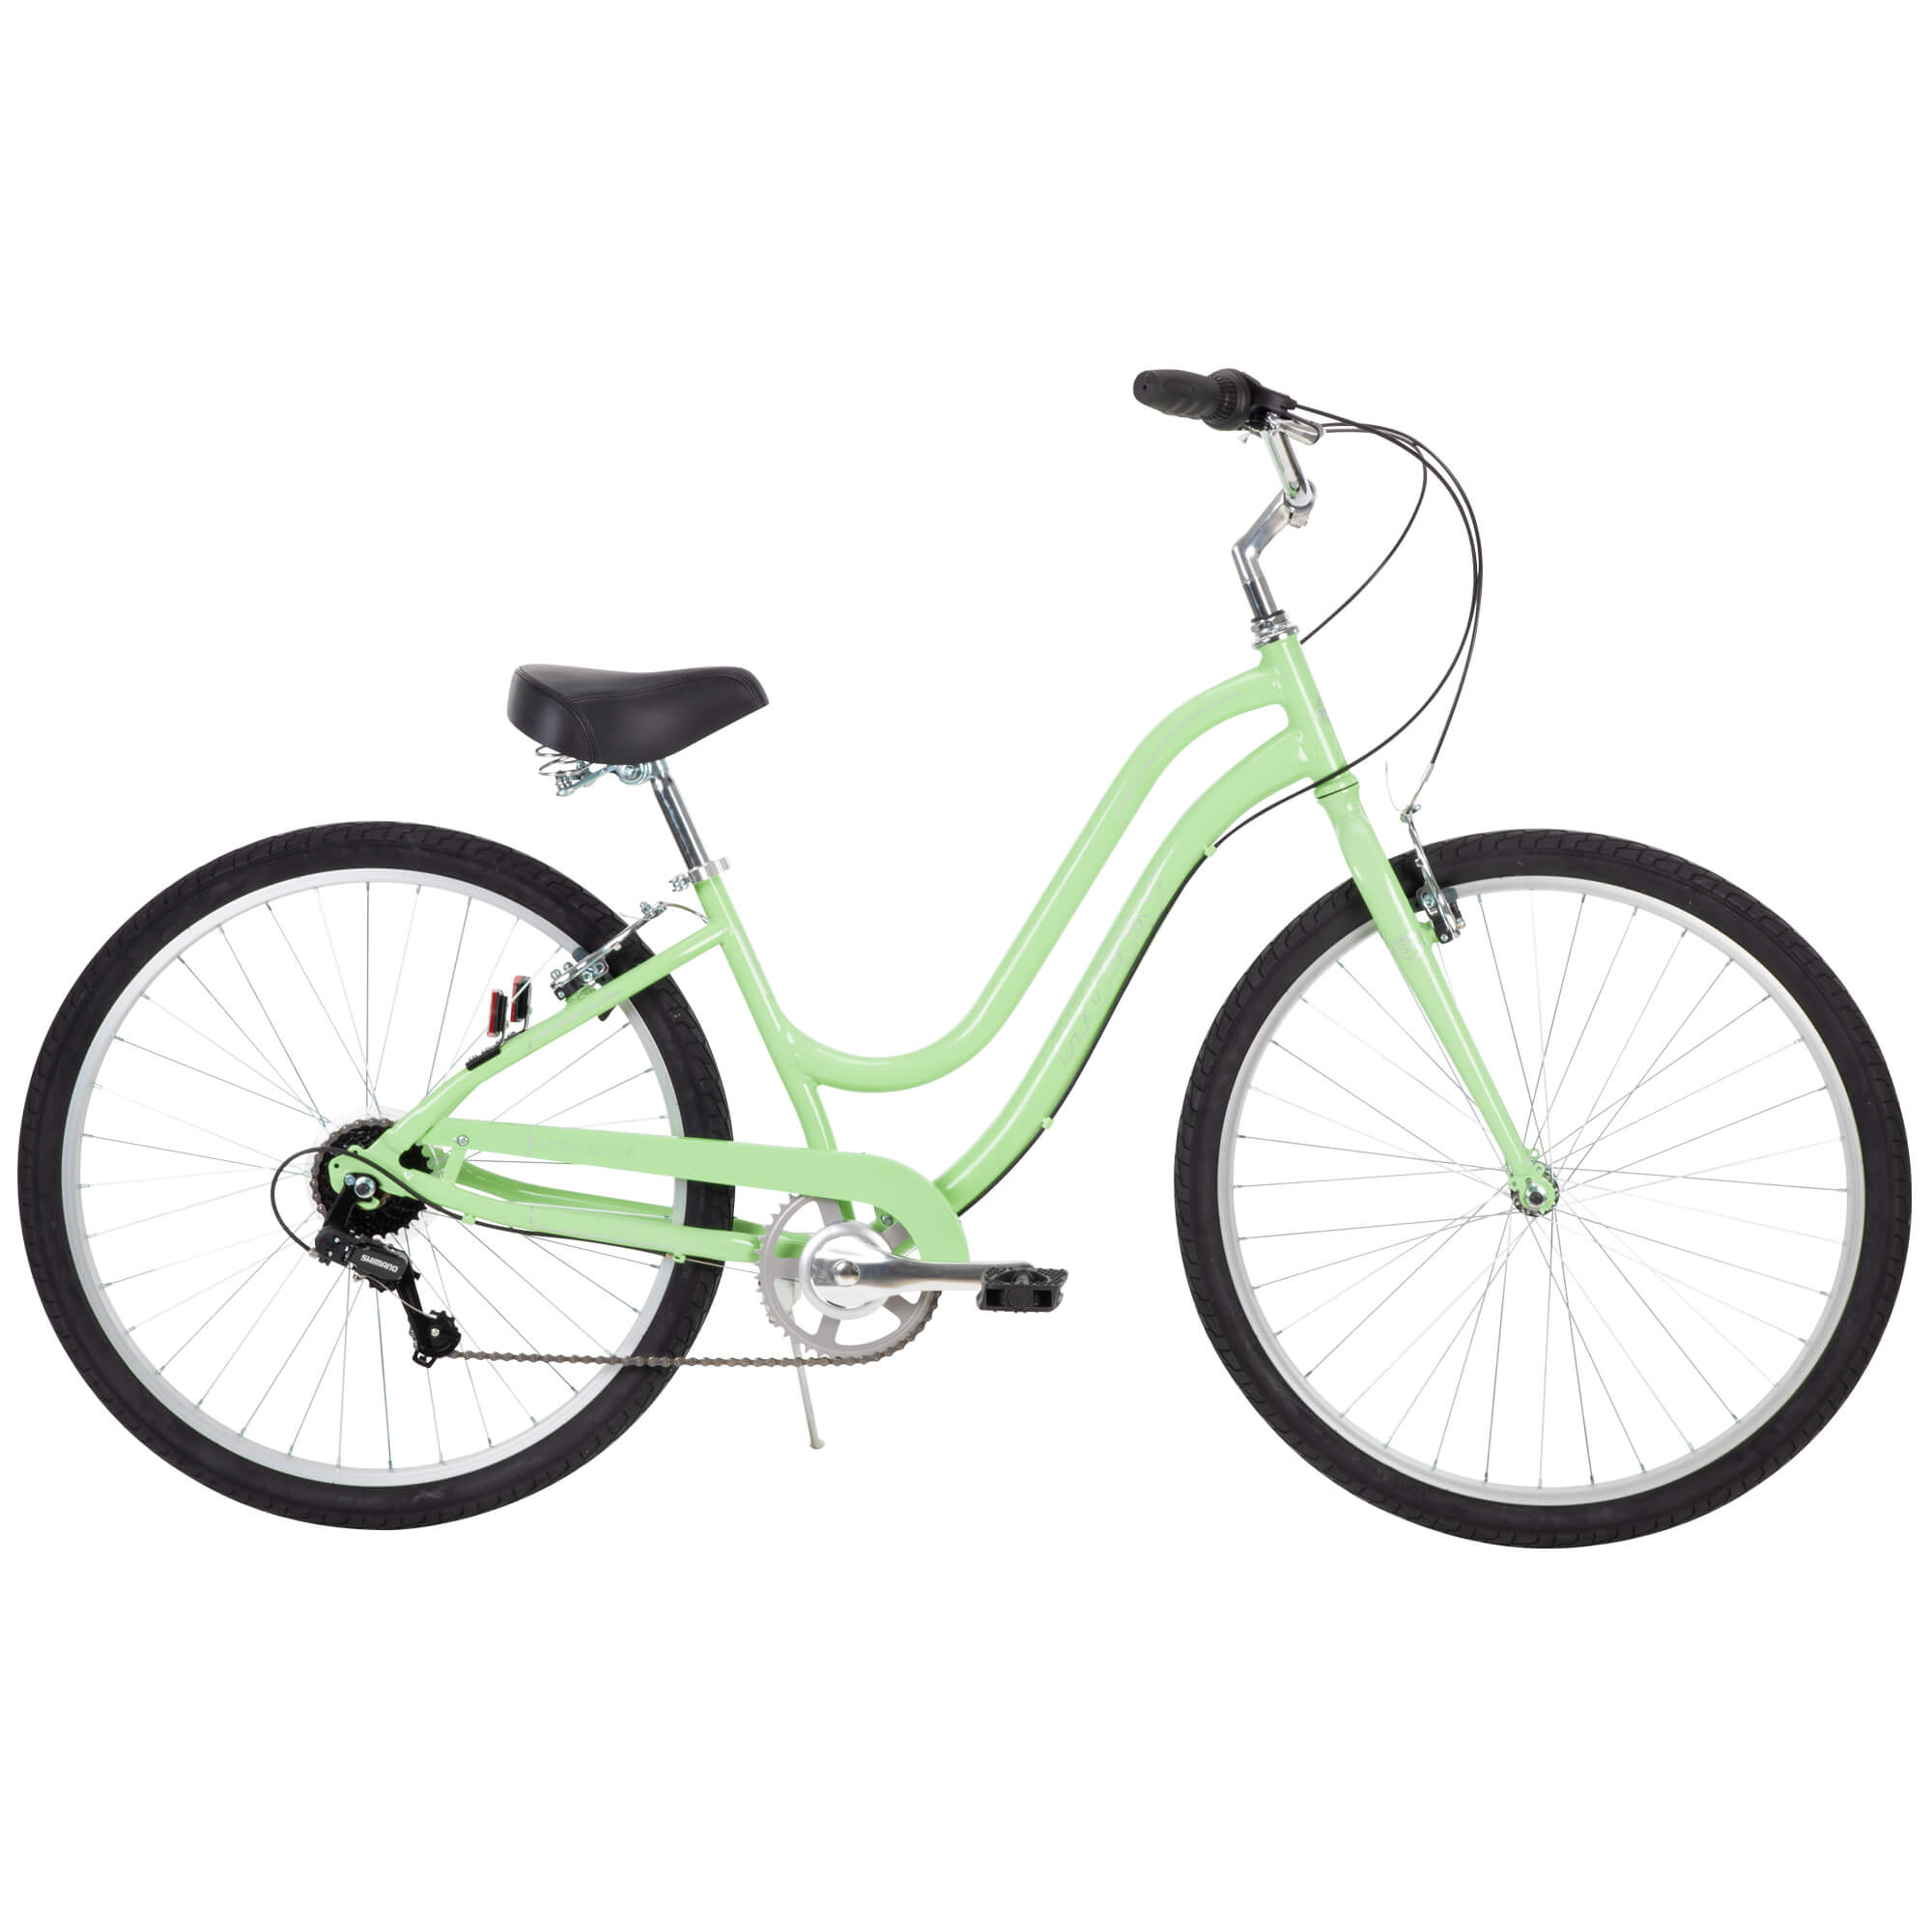 Huffy 27.5 in. Parkside Women's Comfort Bike with Perfect Fit Frame, Ages 13+ Years, Mint - image 4 of 11